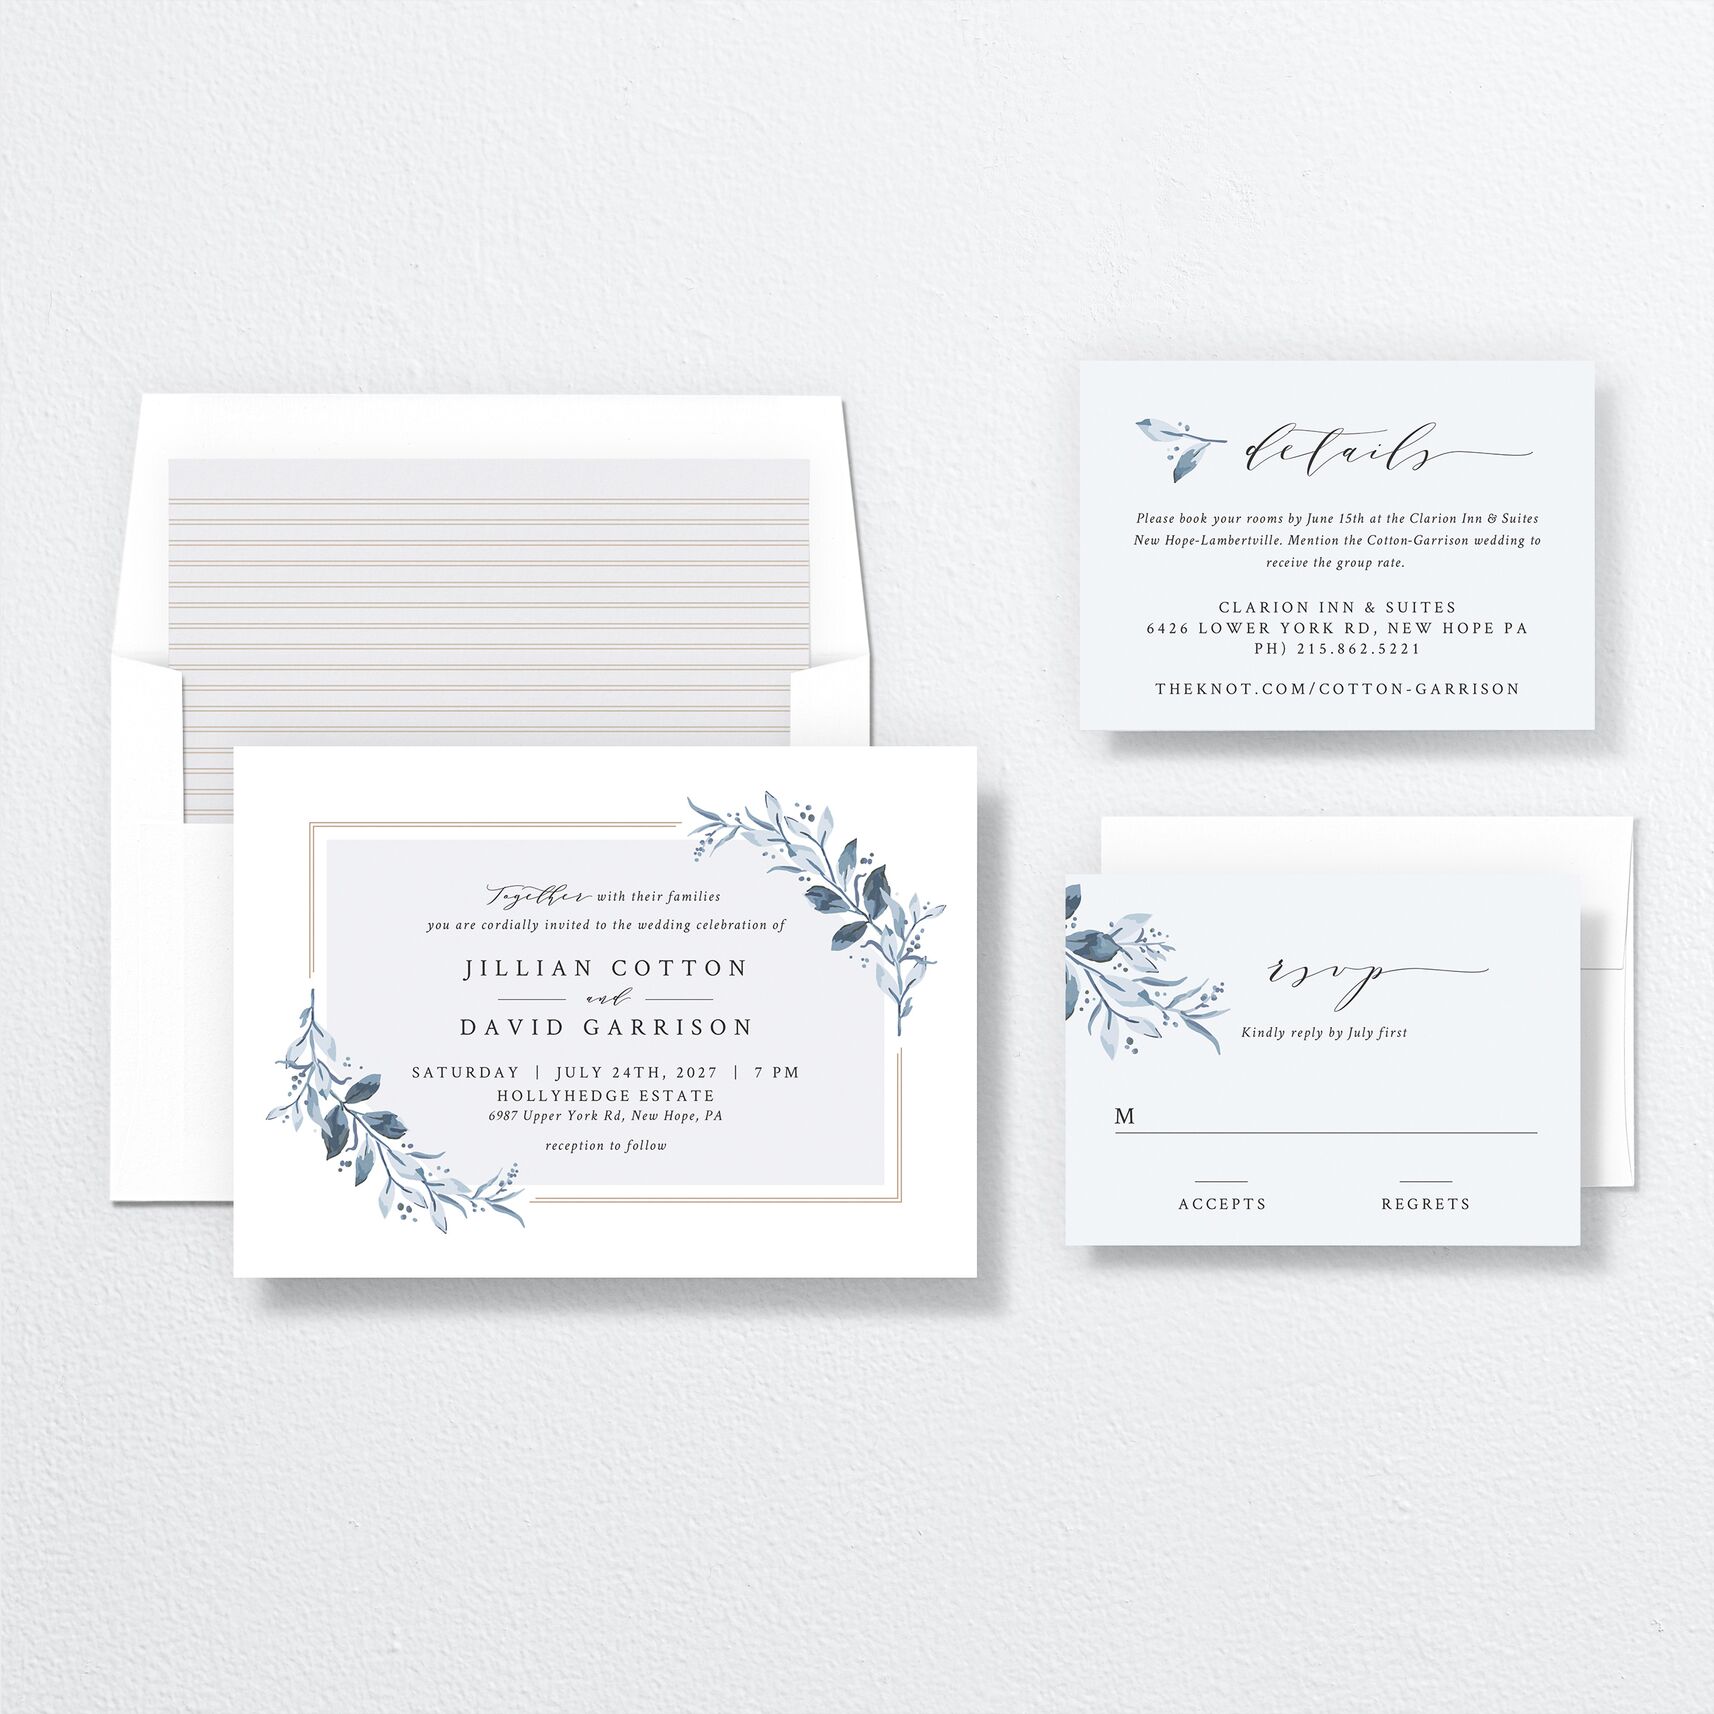  Classic Greenery Wedding Invitations suite in blue